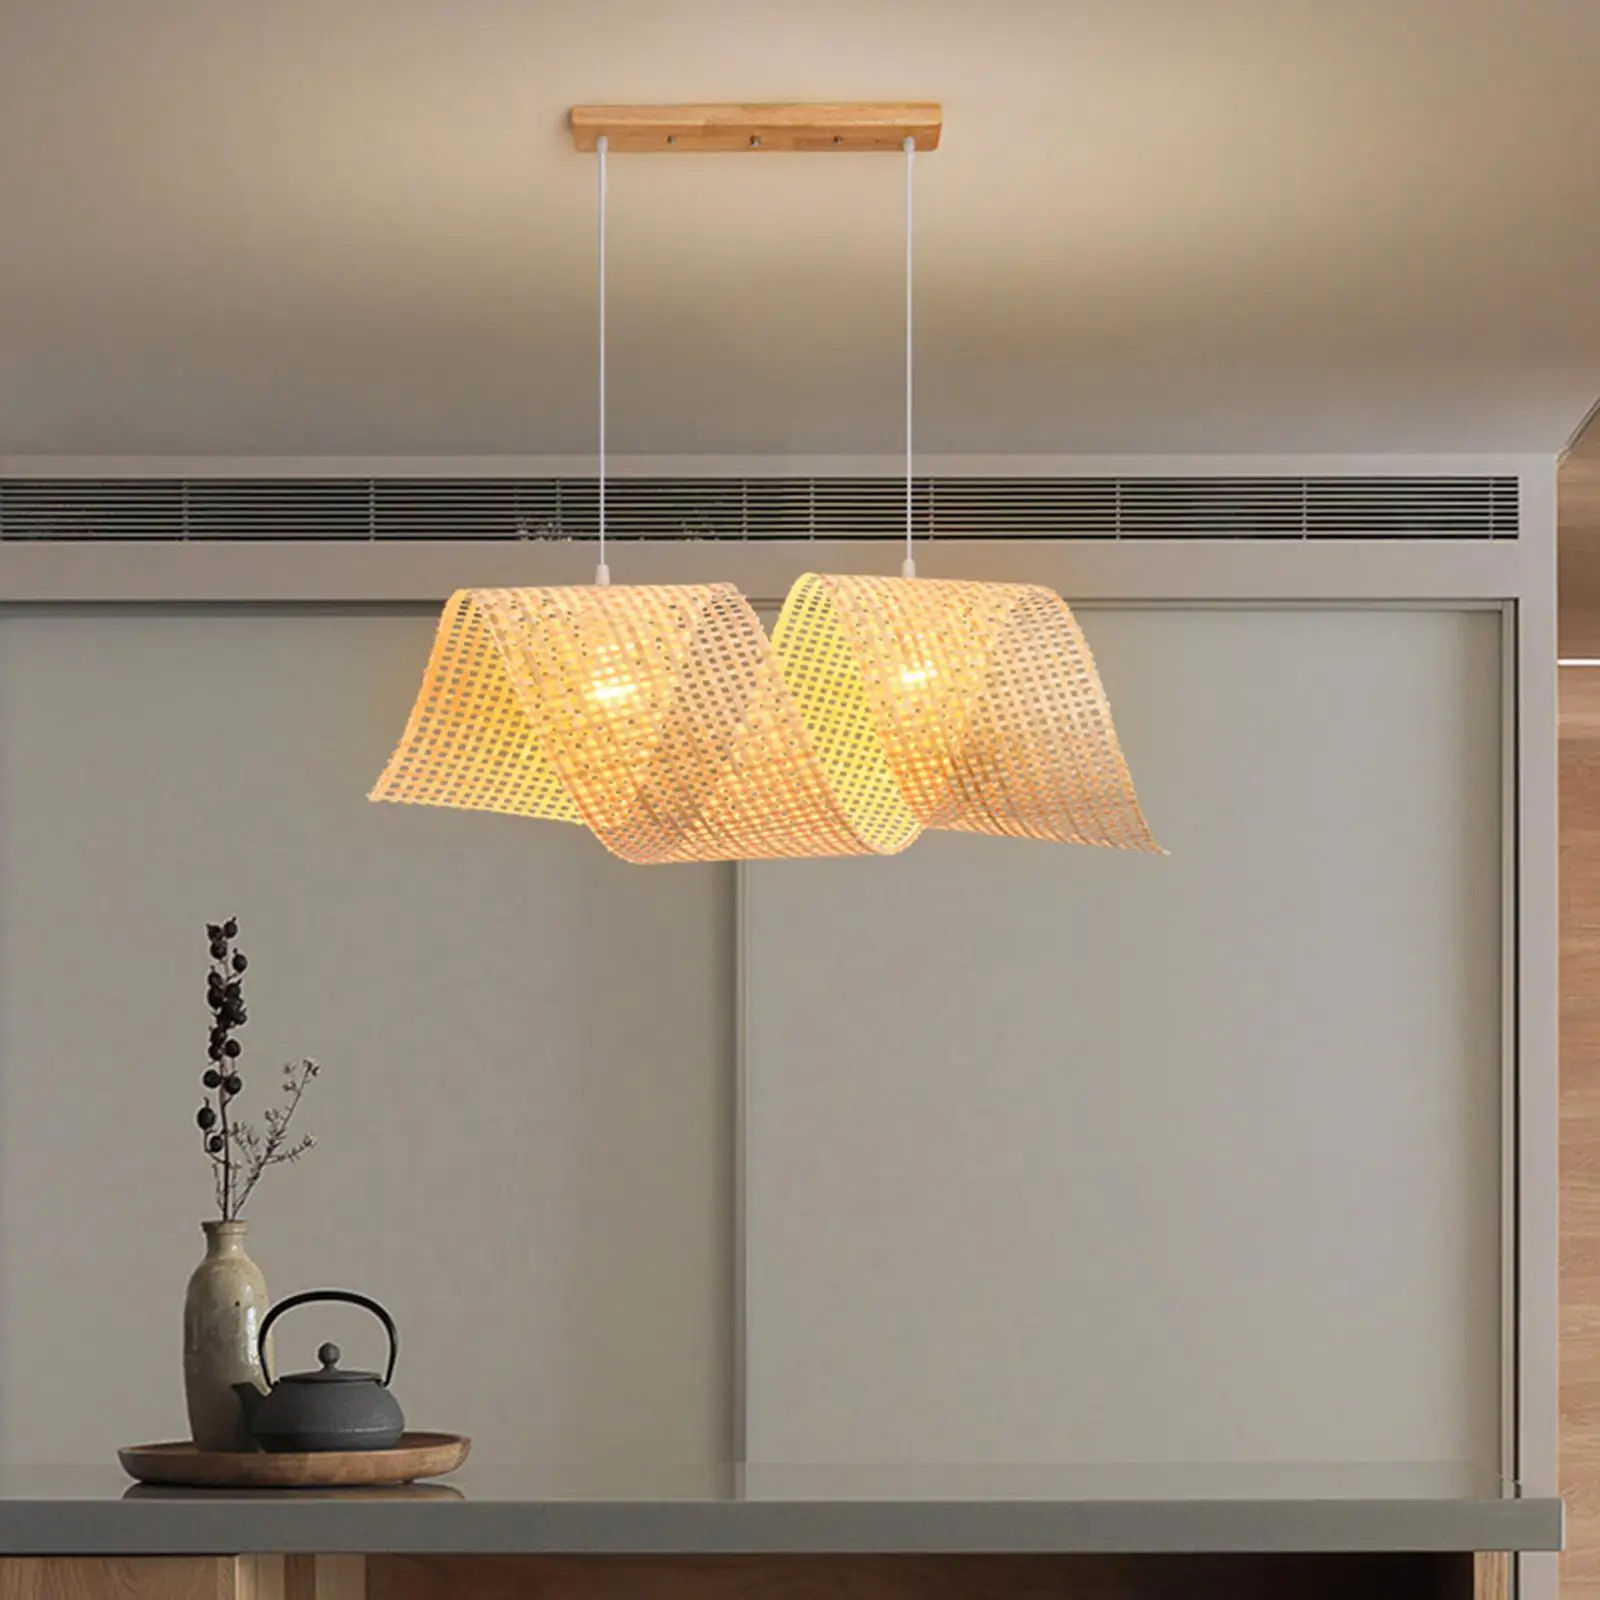 Rattan Pendant Light Hanging Light Bamboo Wicker Lamp Shade for Kitchen Island Living Room Farmhouse Dining Room Teahouse